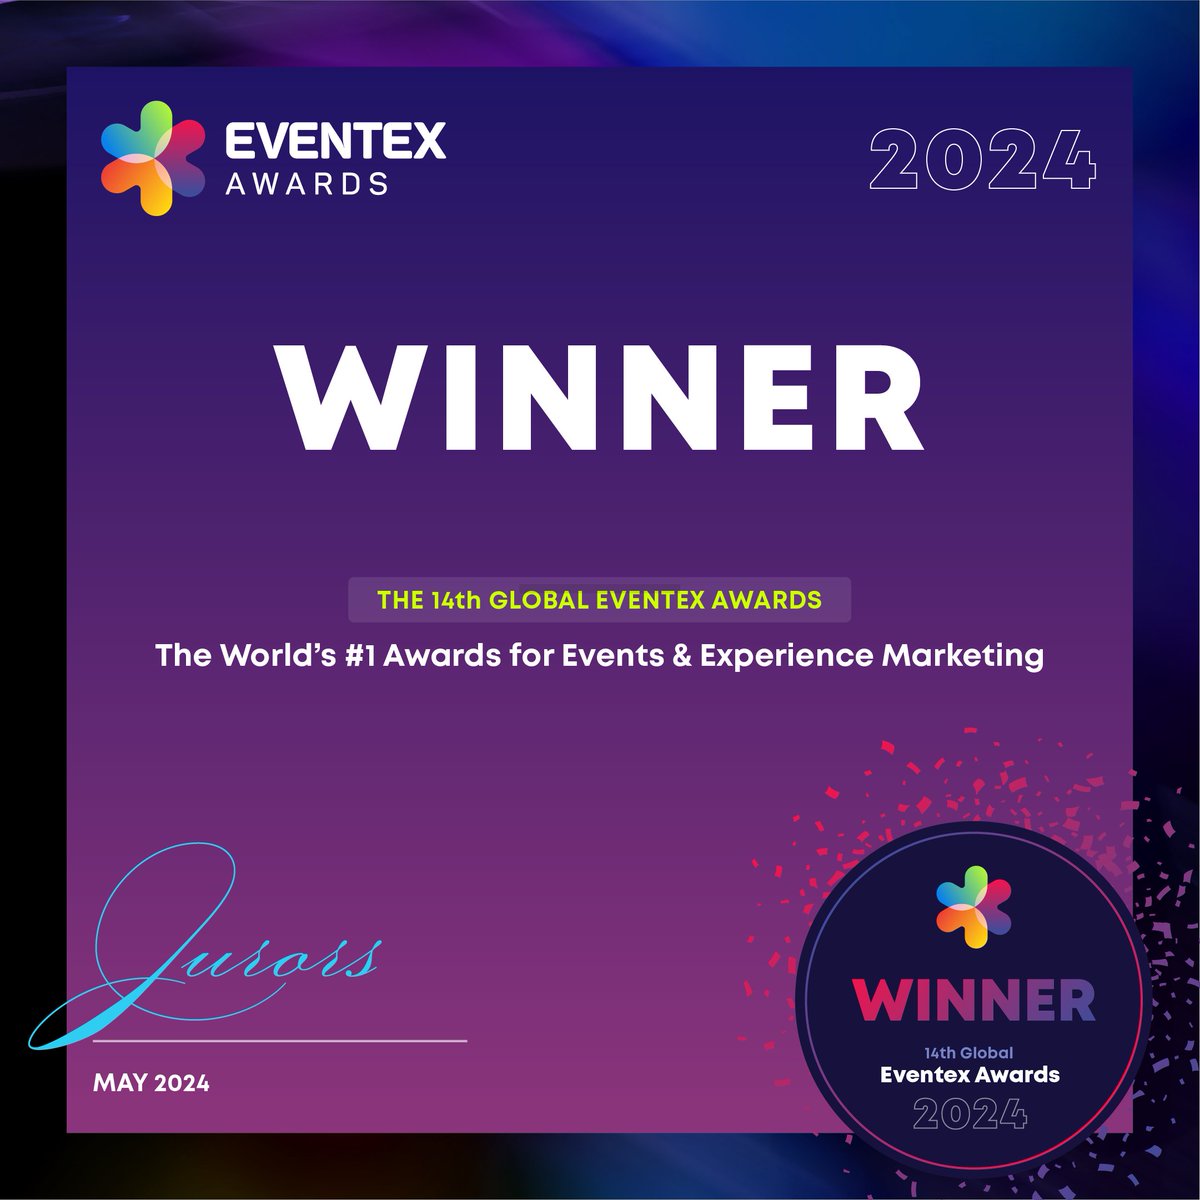 🏆 Big Win! We just snagged the Gold in the New Event Technology category at the Eventex Awards 2024 for our Camel Avenue Festival Drone Show!

Thank You! To everyone who supports us—this is just the beginning! ❤️

#eventexawards2024 #eventex #neweventtechnology #droneshow